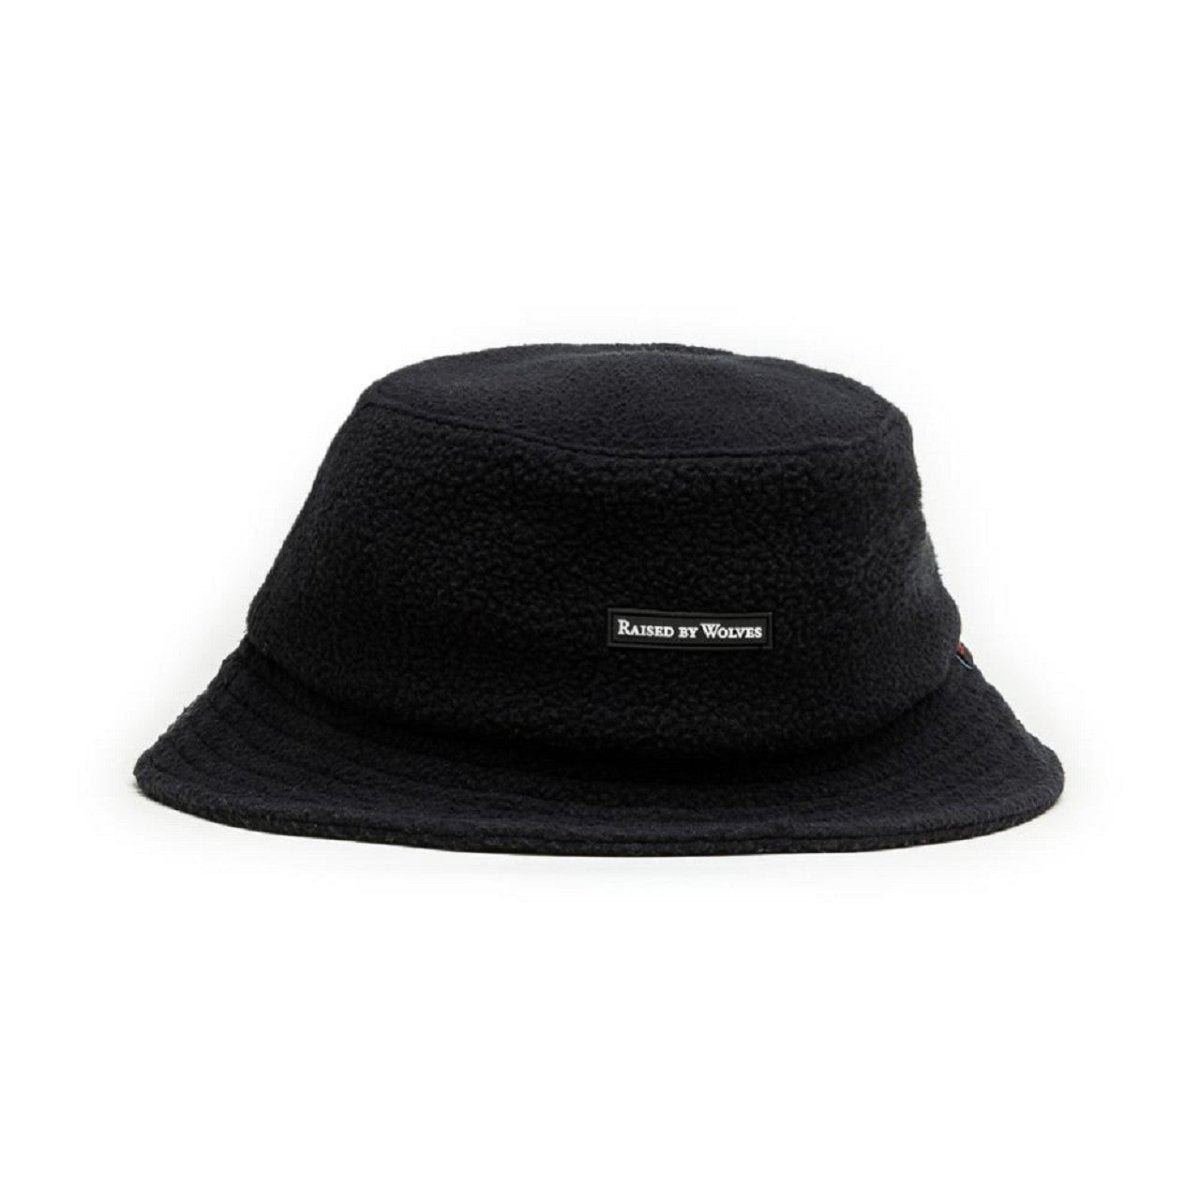 Image of Raised by Wolves Polartec Bucket Hat (Black)